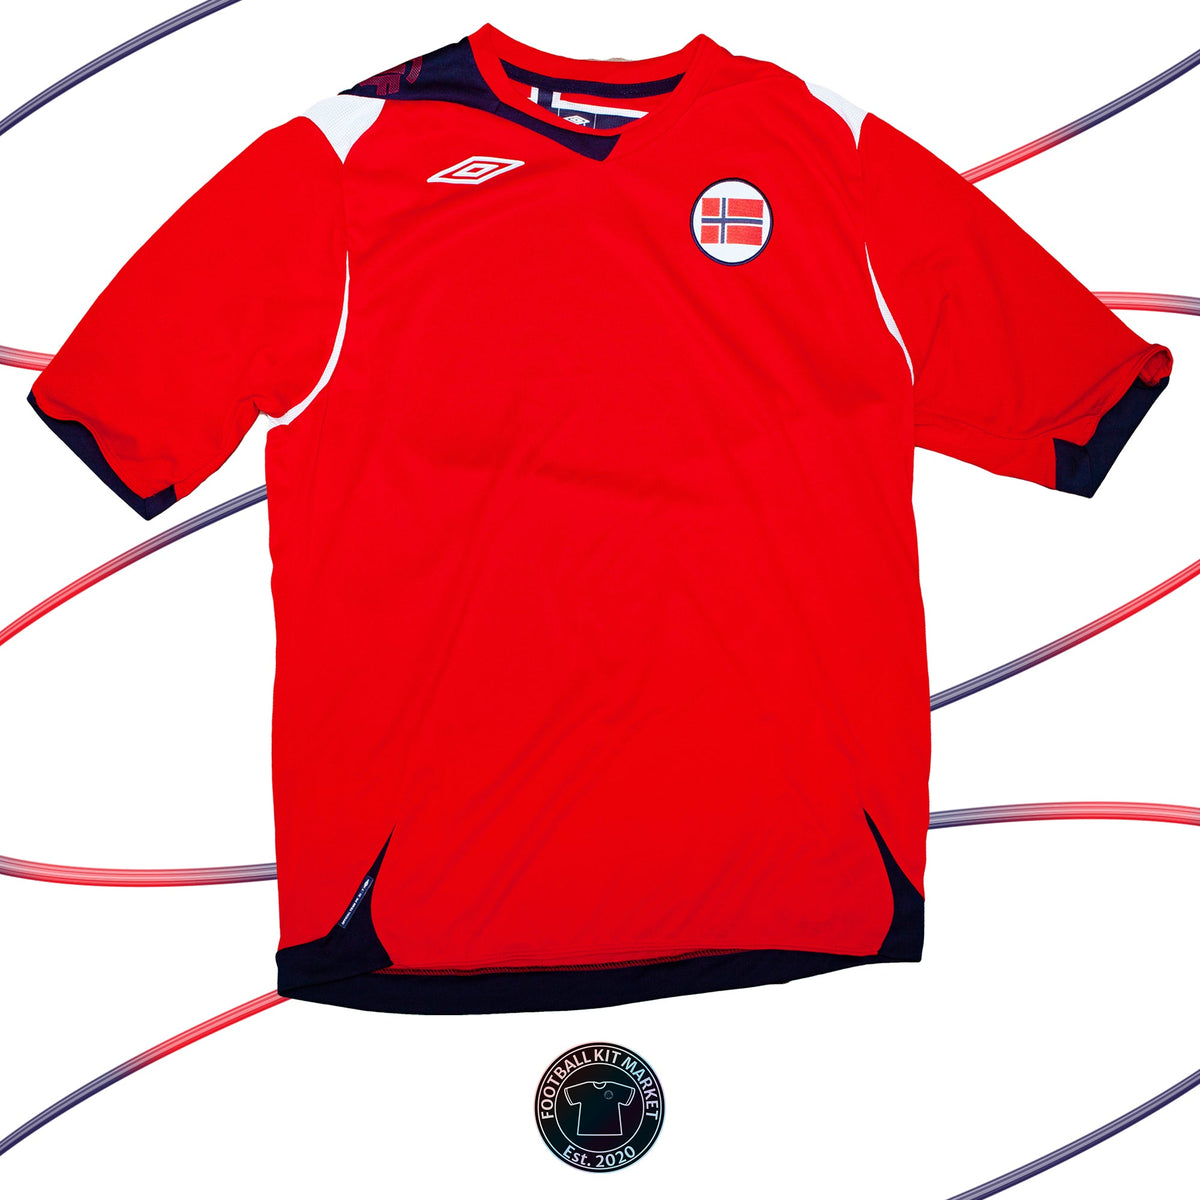 Genuine NORWAY Home Shirt (2008-2009) - UMBRO (L) - Product Image from Football Kit Market